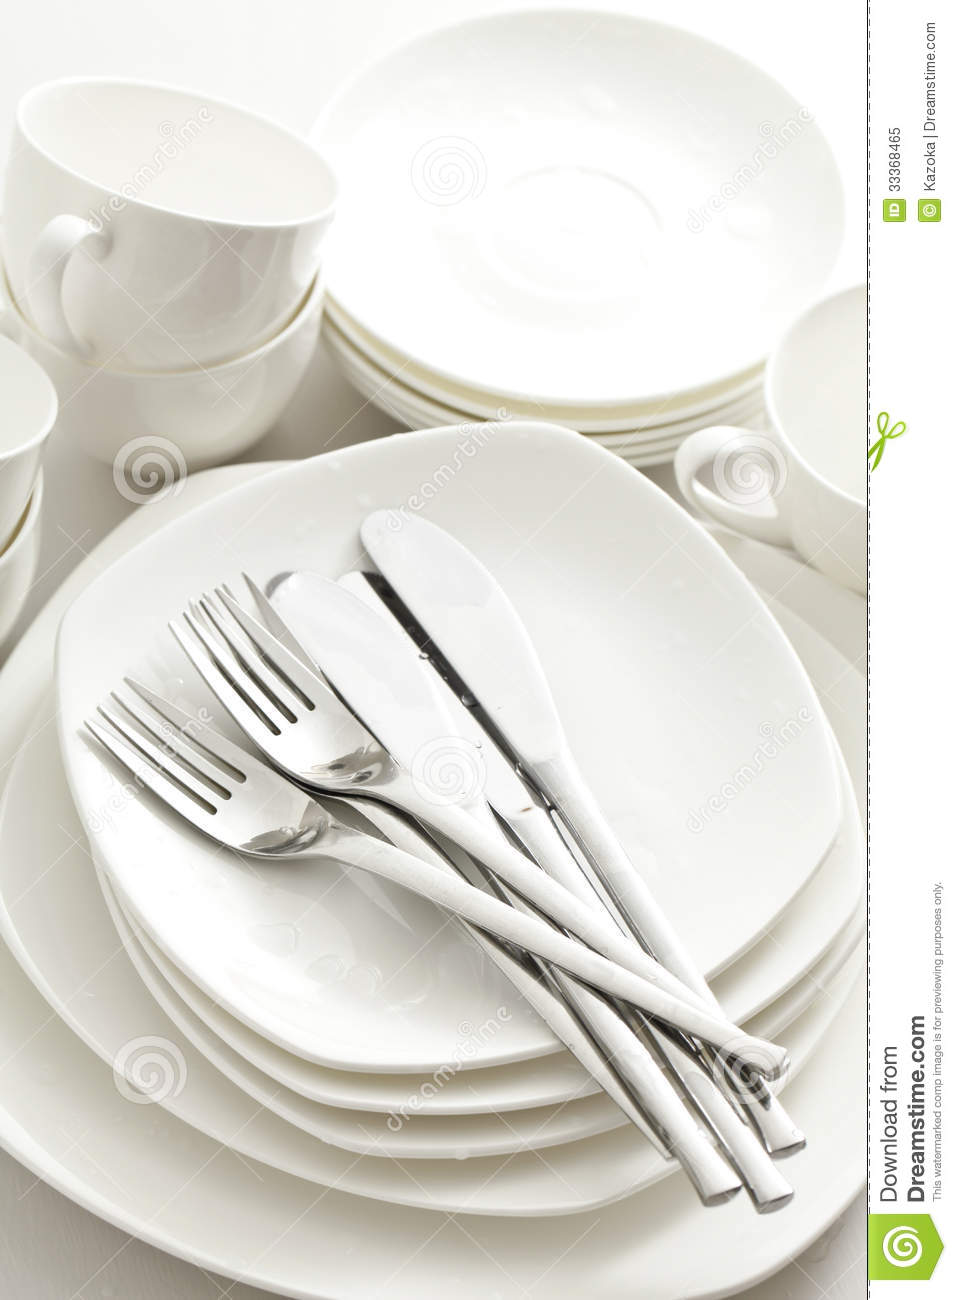 Image Of Kitchen Cutlery And Dishes Piled